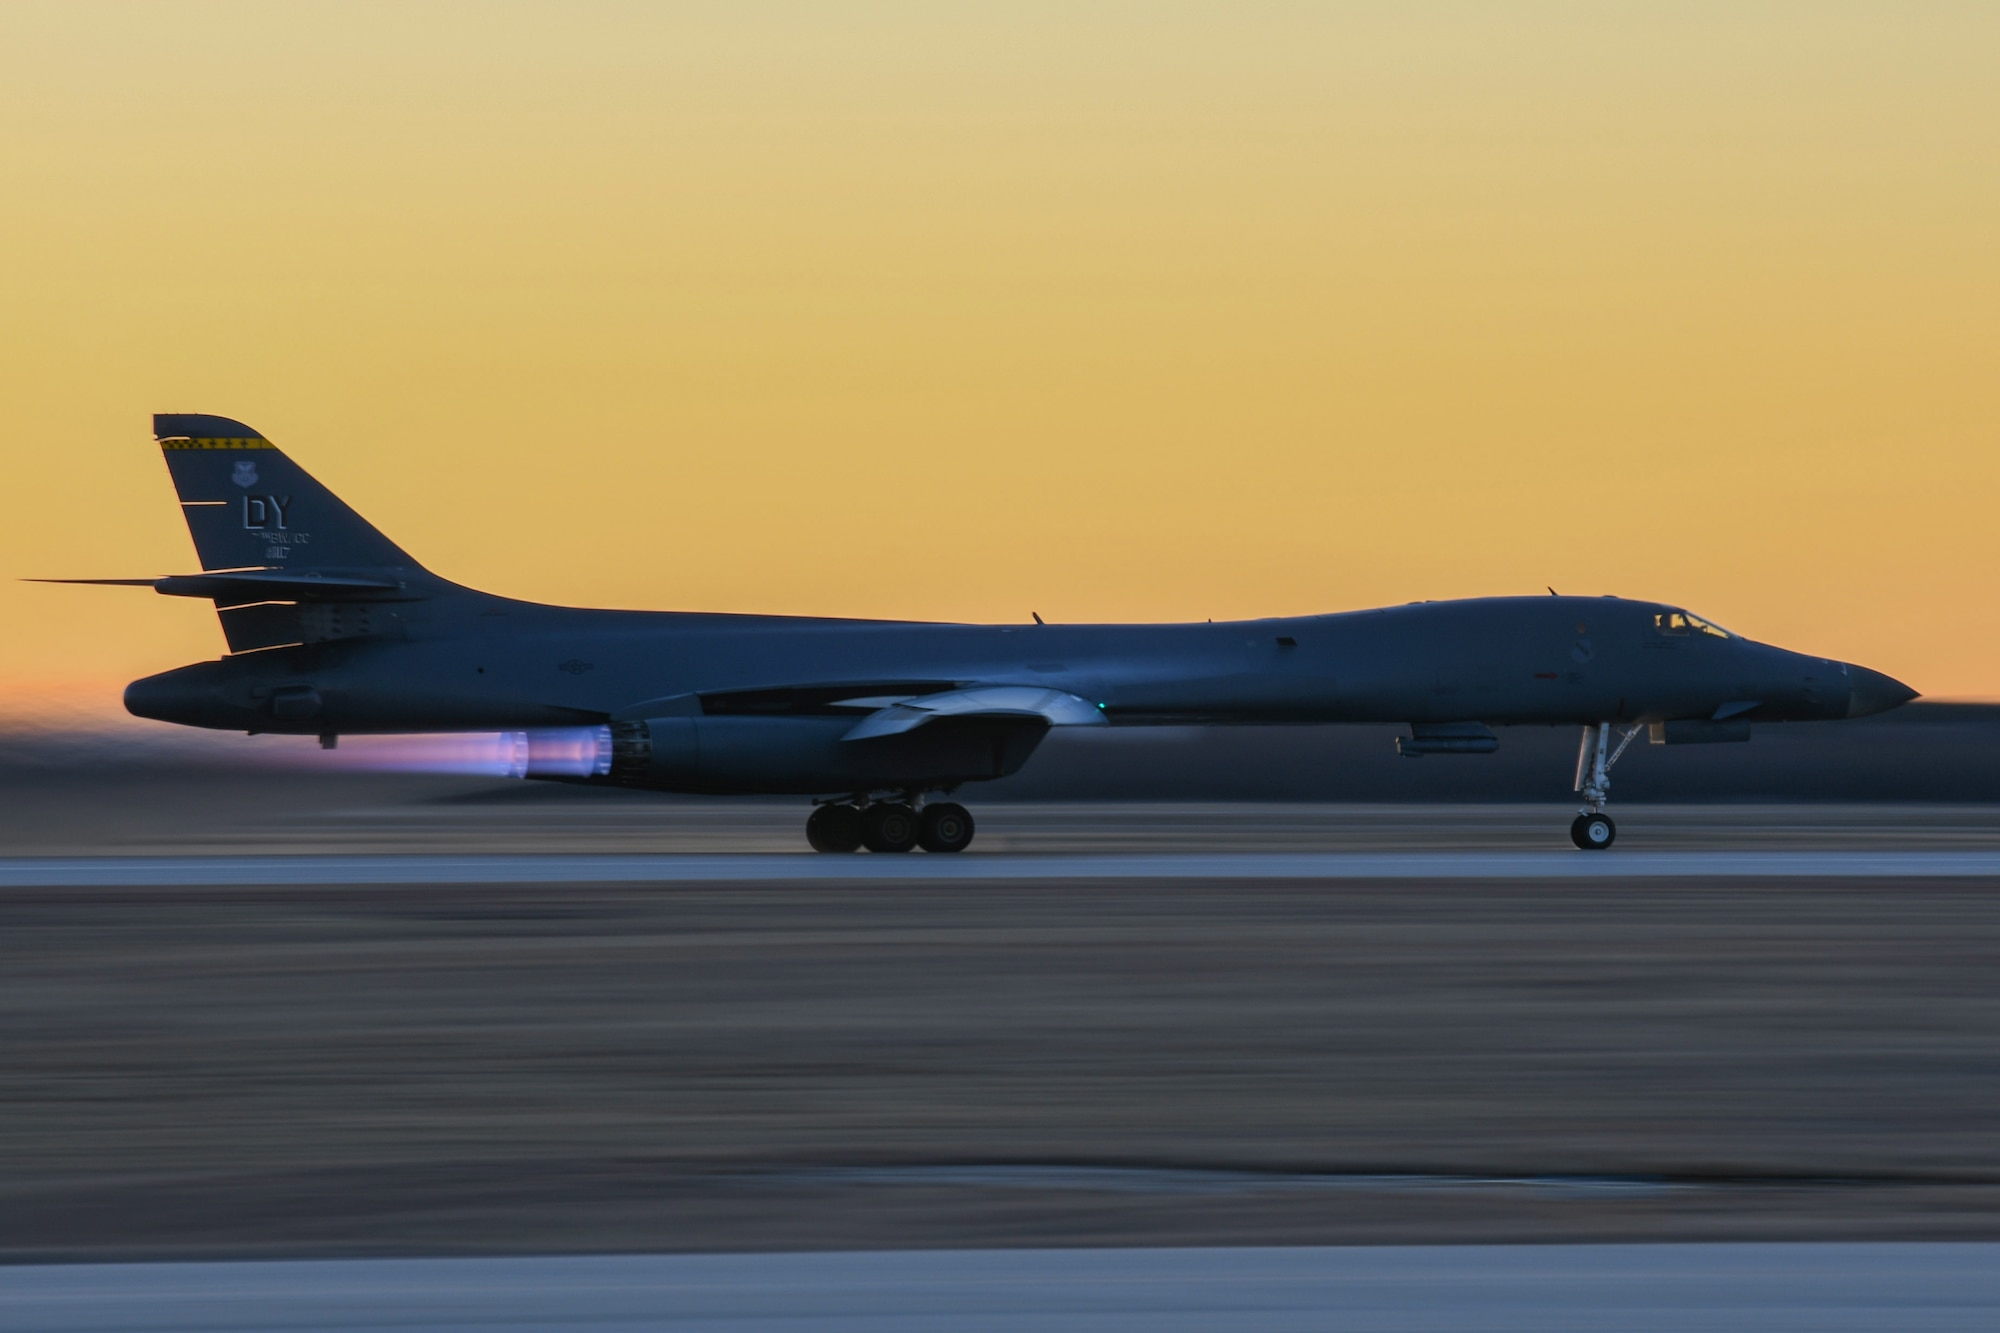 A B-1B Lancer prepares to take off from Dyess Air Force Base, Texas, Feb. 21, 2021. The 7th Bomb Wing routinely supports bomber training missions around the globe. (U.S. Air Force photo by Airman 1st Class Josiah Brown)